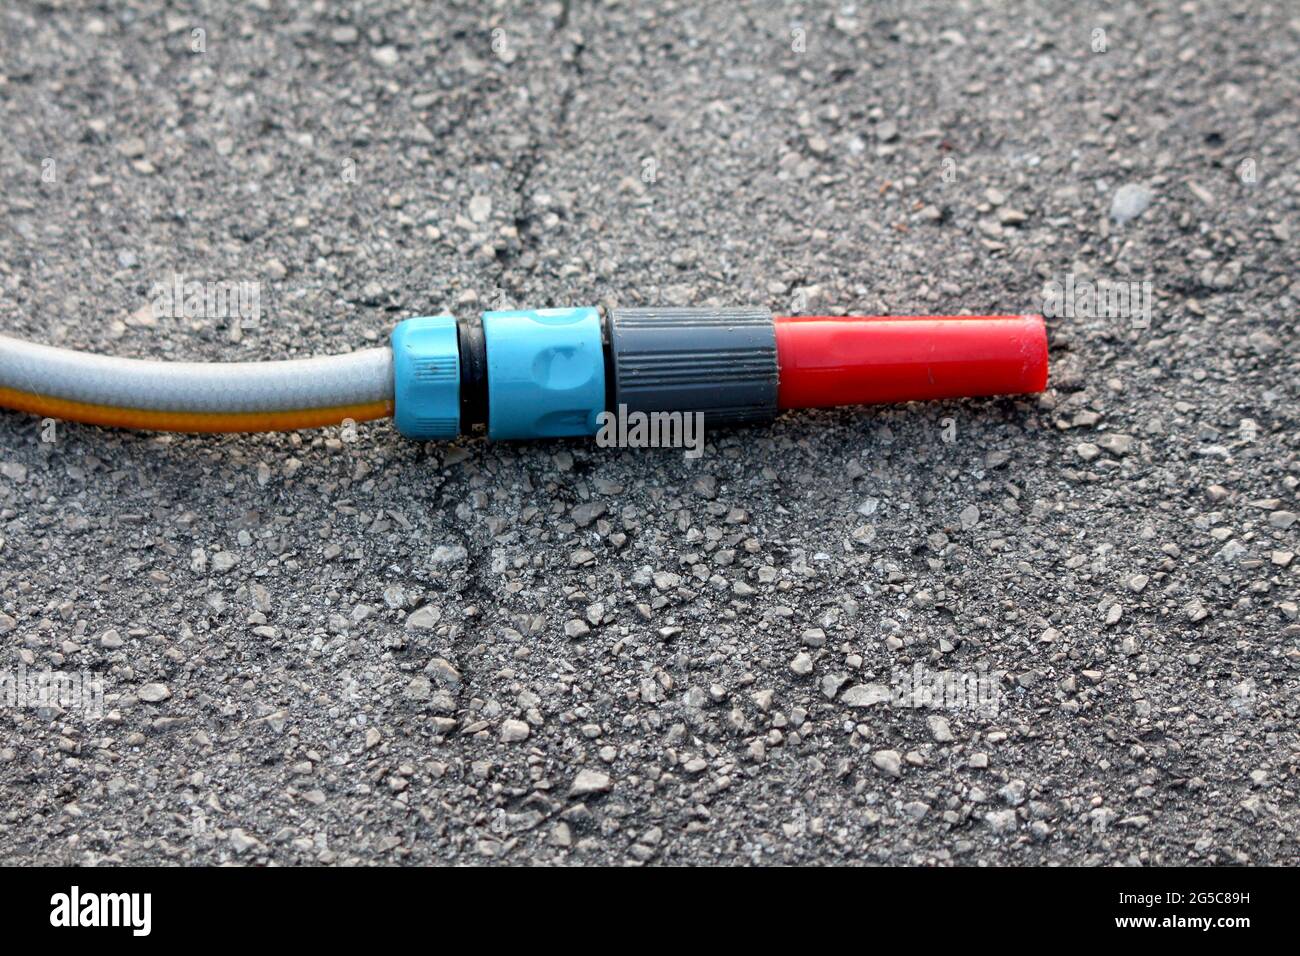 Plastic garden hose nozzle in various colors from red to grey and light  blue left in suburban family house paved driveway on warm sunny spring day  Stock Photo - Alamy